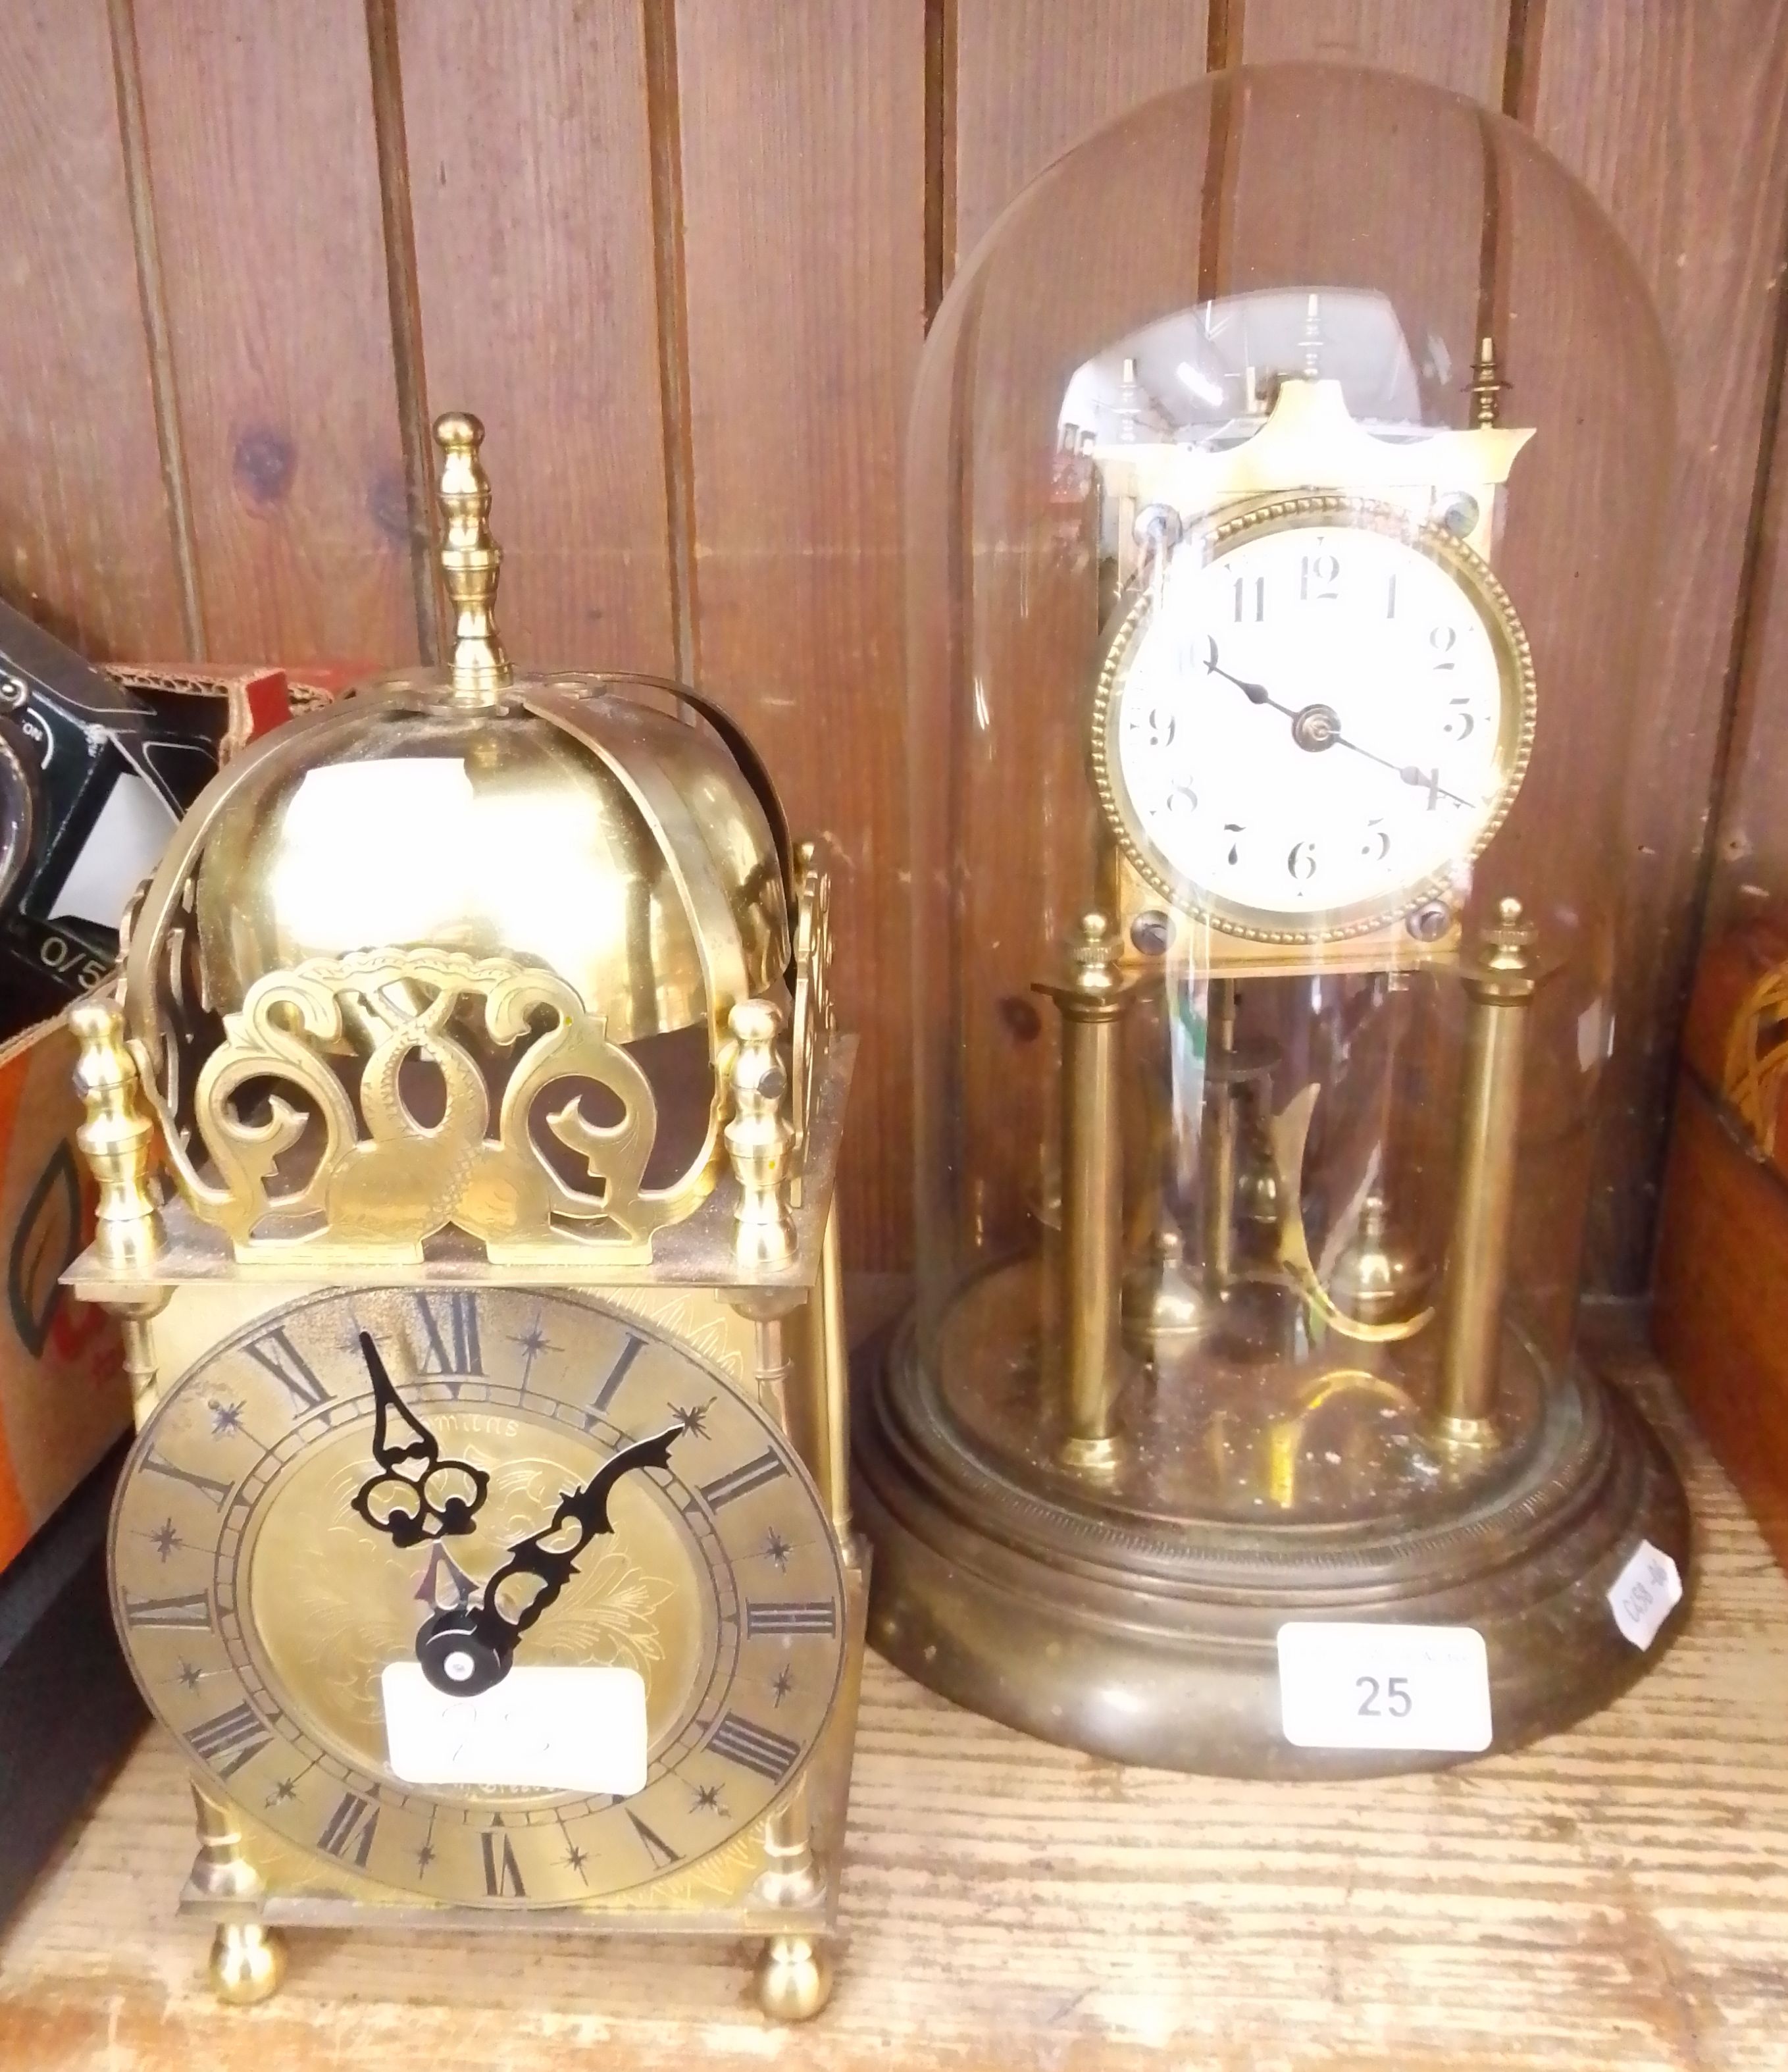 A 400 day German clock under glass dome and a brass lantern clock.